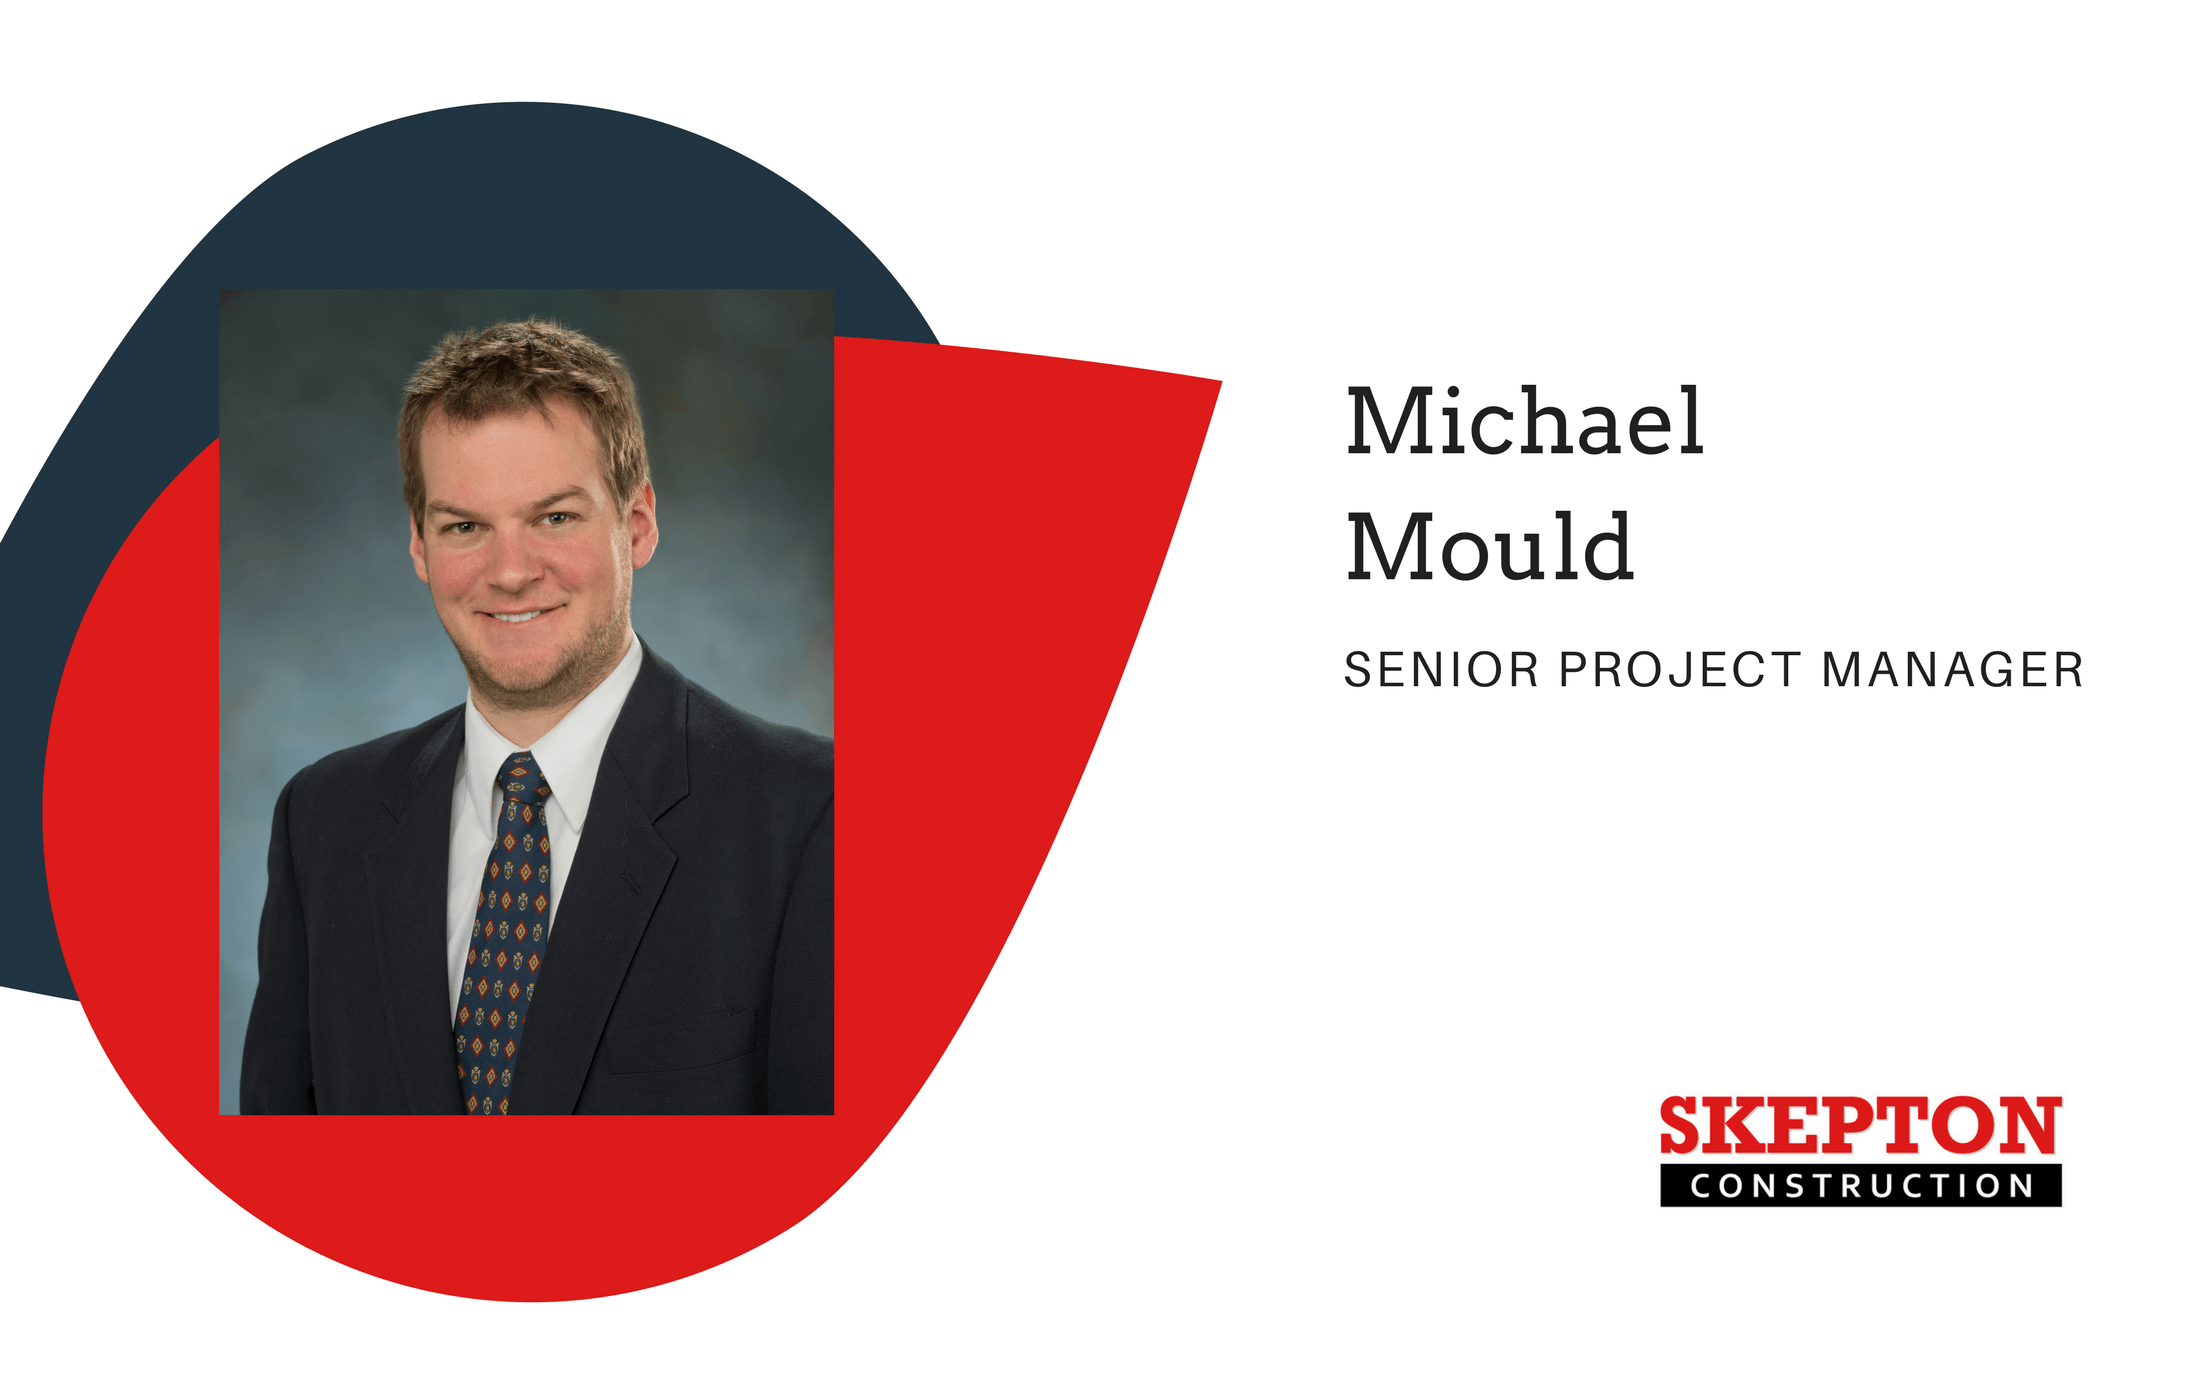 Skepton Construction Announces Promotion of Michael Mould to Senior Project Manager